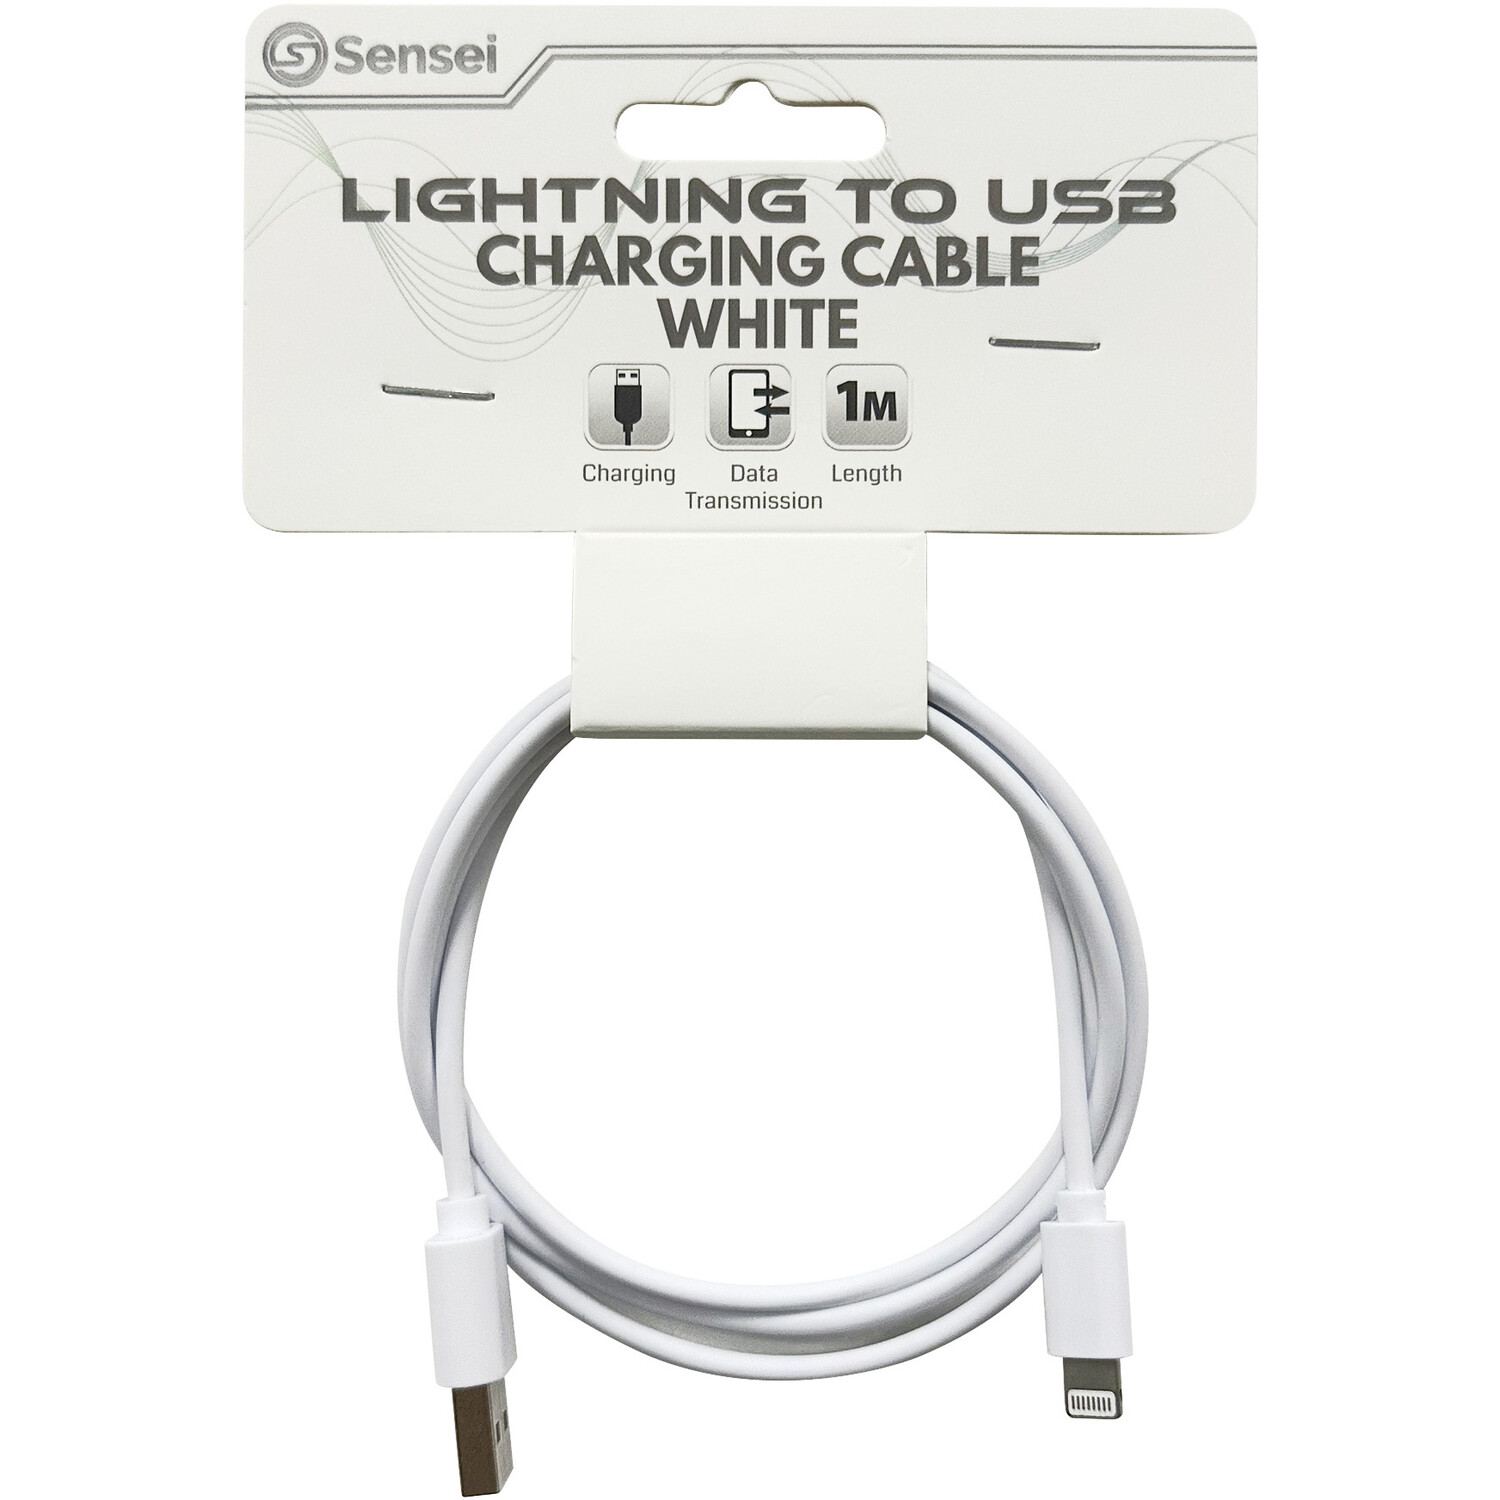 Lightning to USB Charging Cable Image